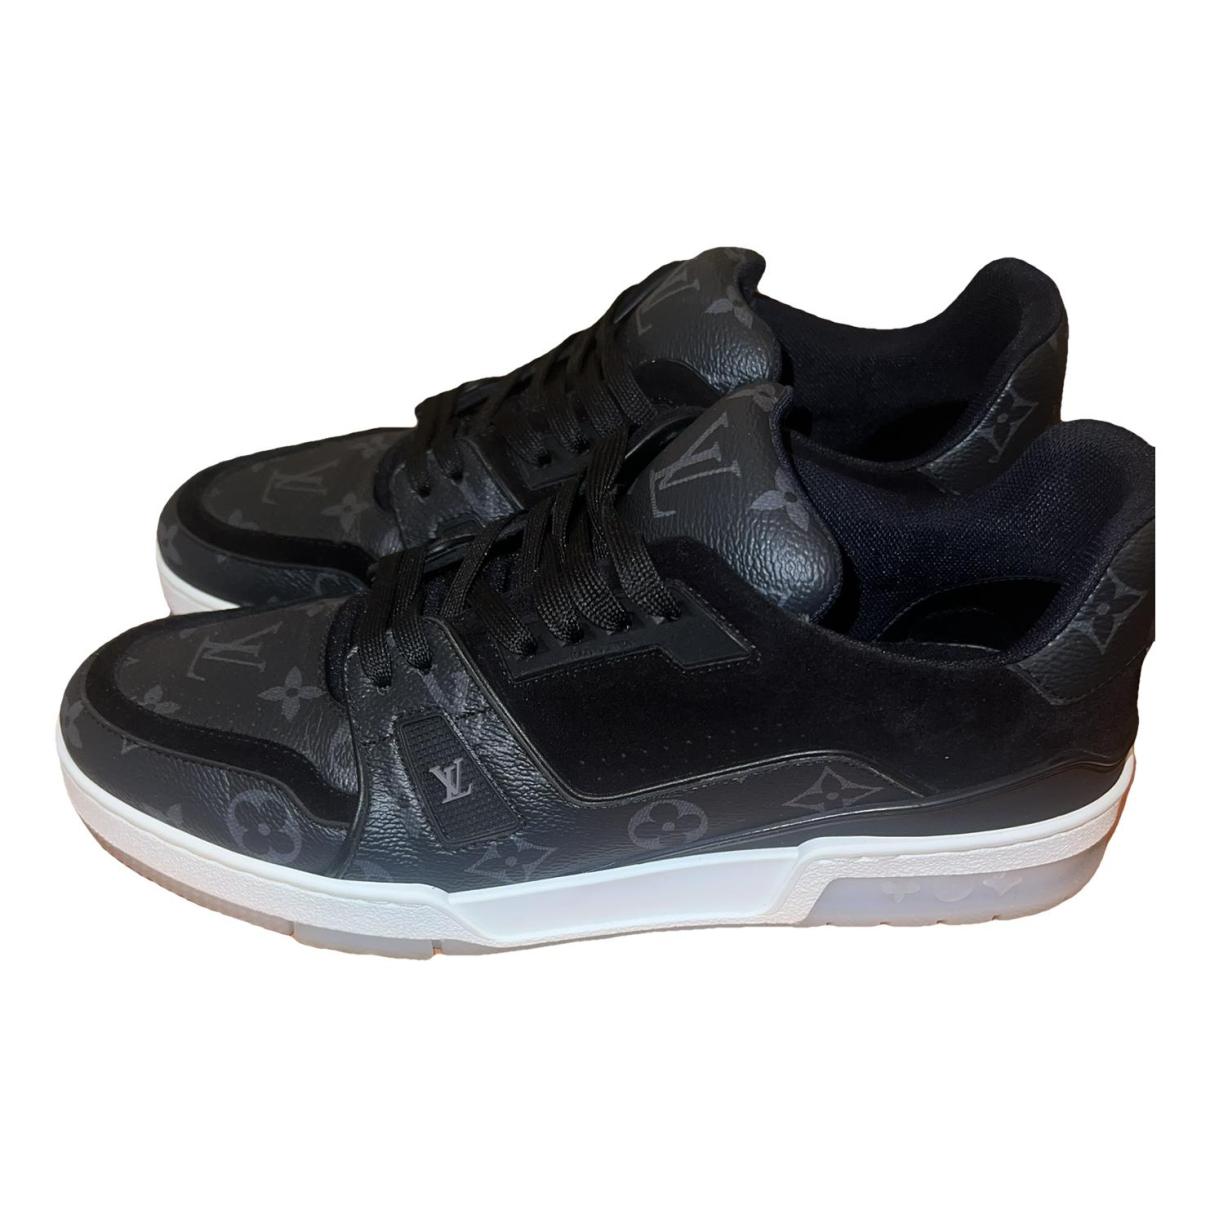 Montant lv trainer leather high trainers Louis Vuitton Grey size 41 EU in  Leather - 28853507